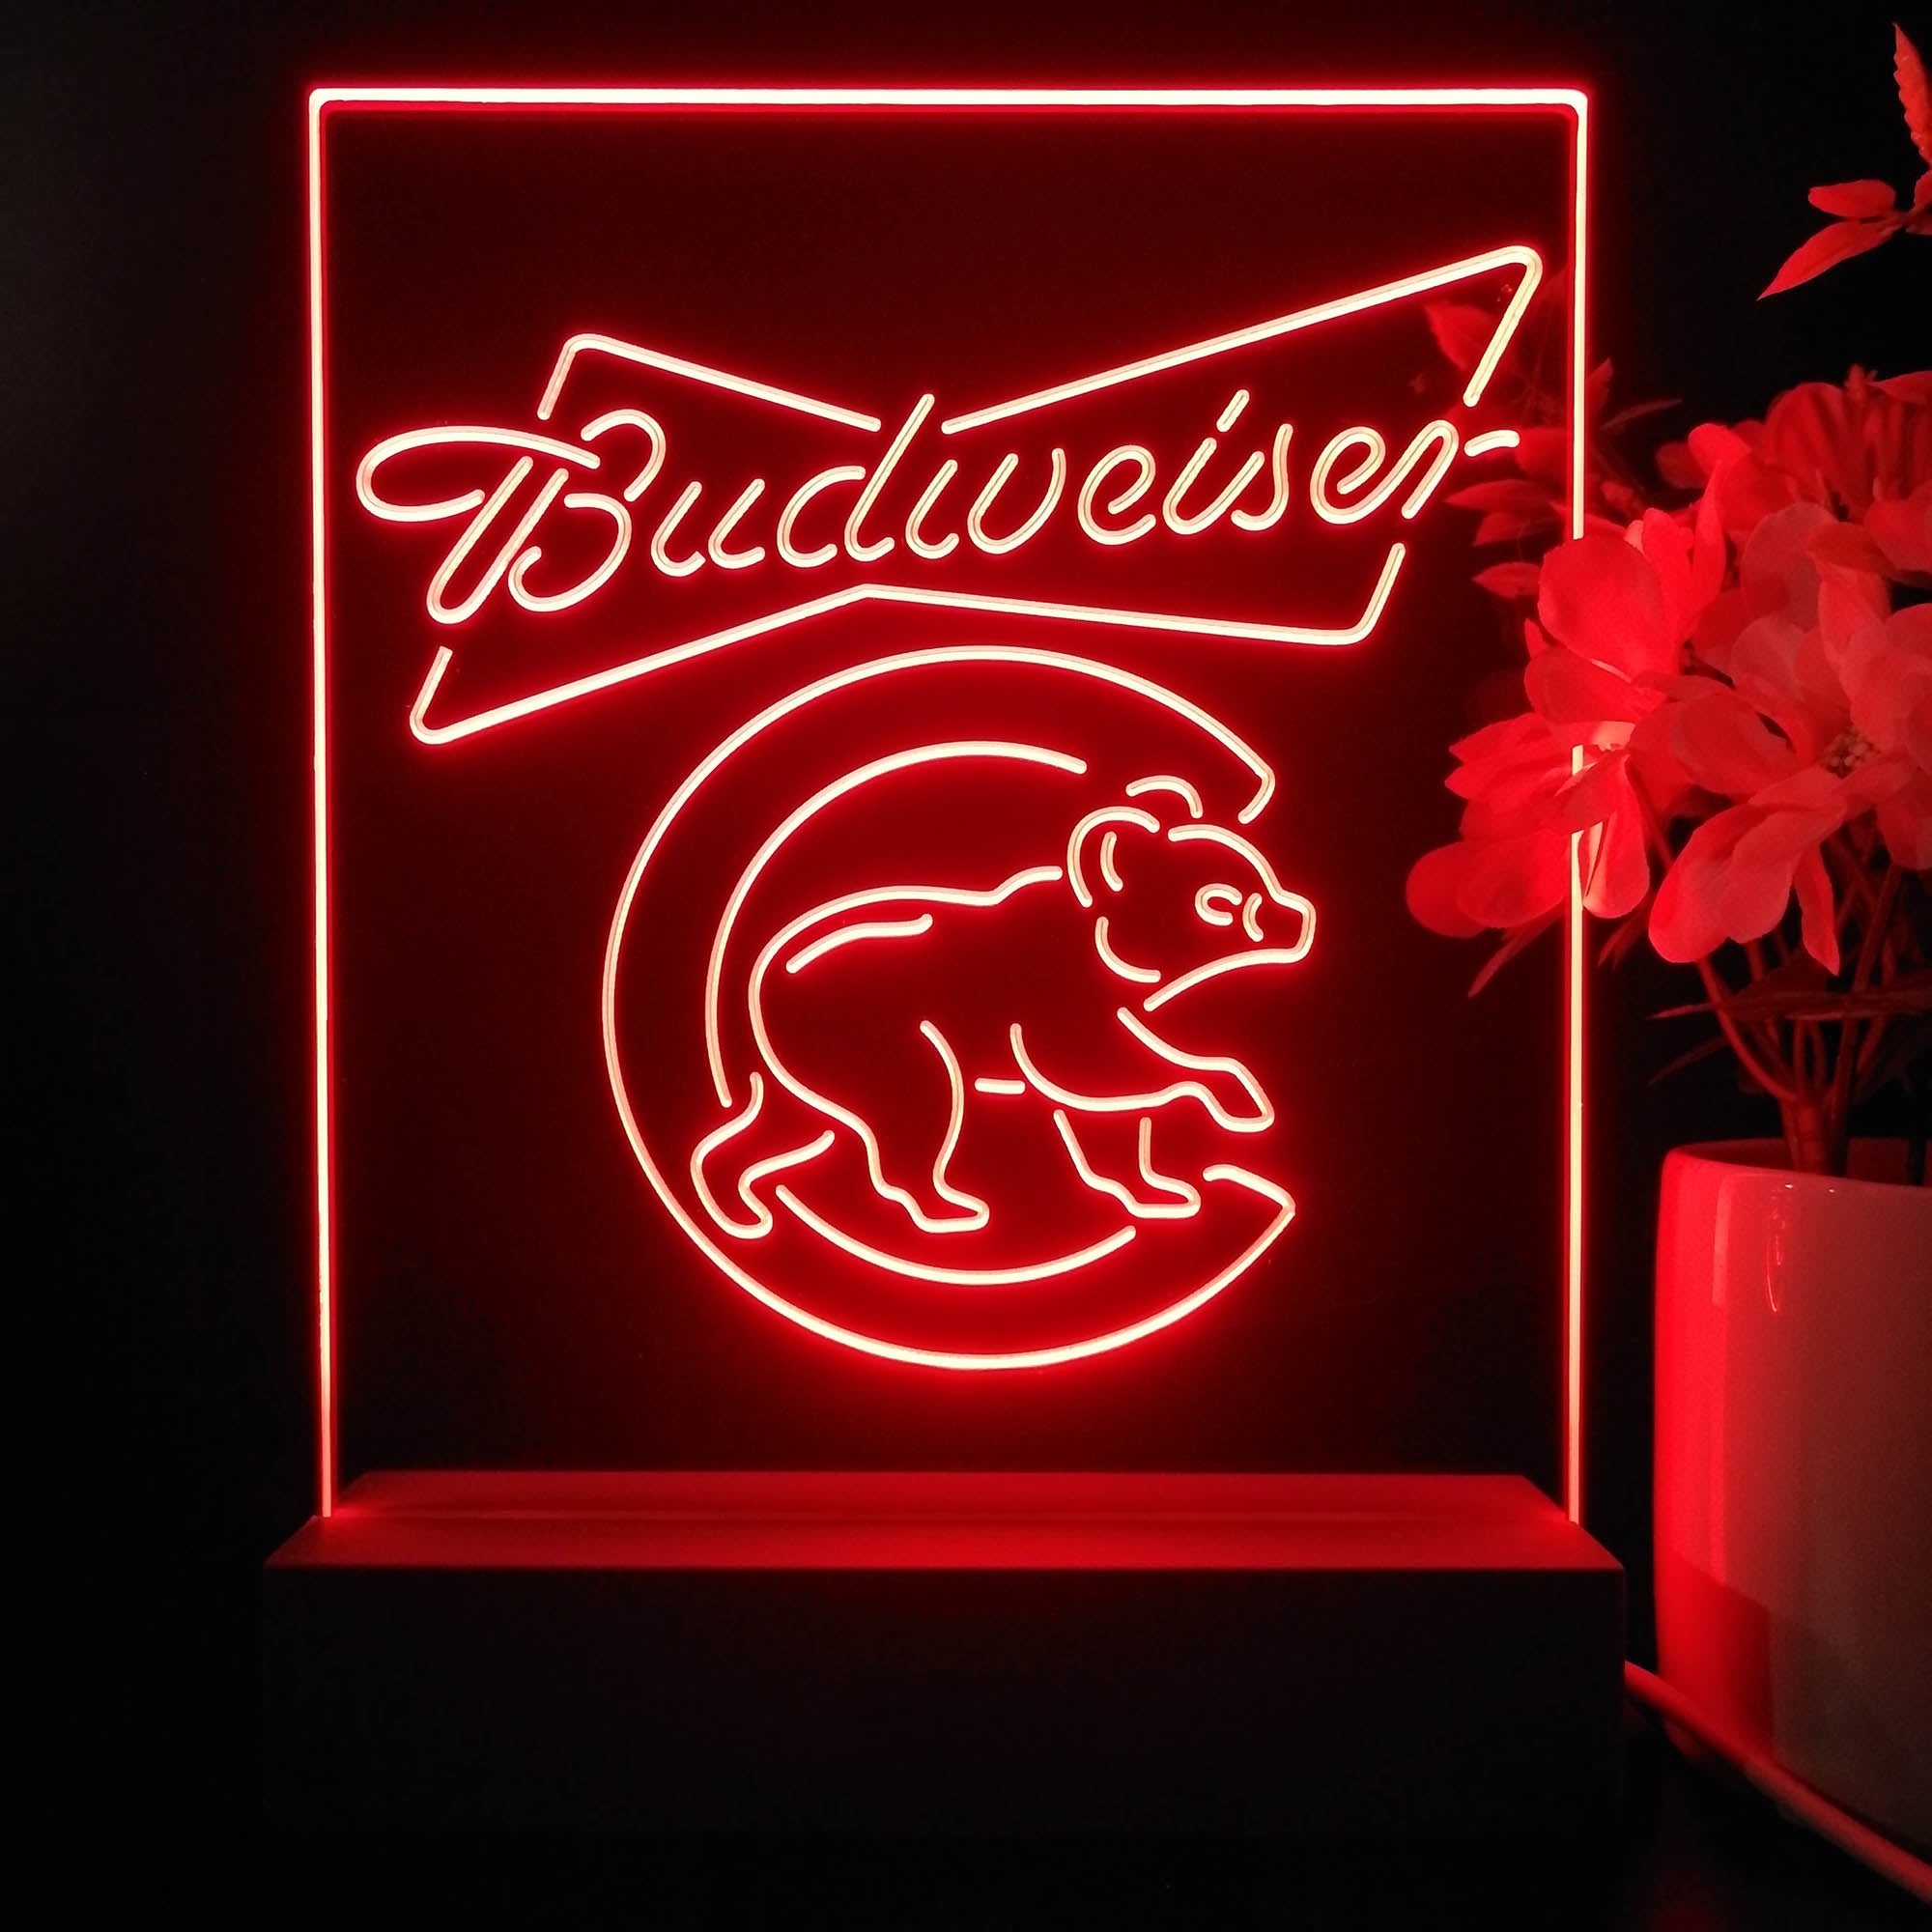 Chicago Bears Budweiser Neon Sign Table Top Lamp